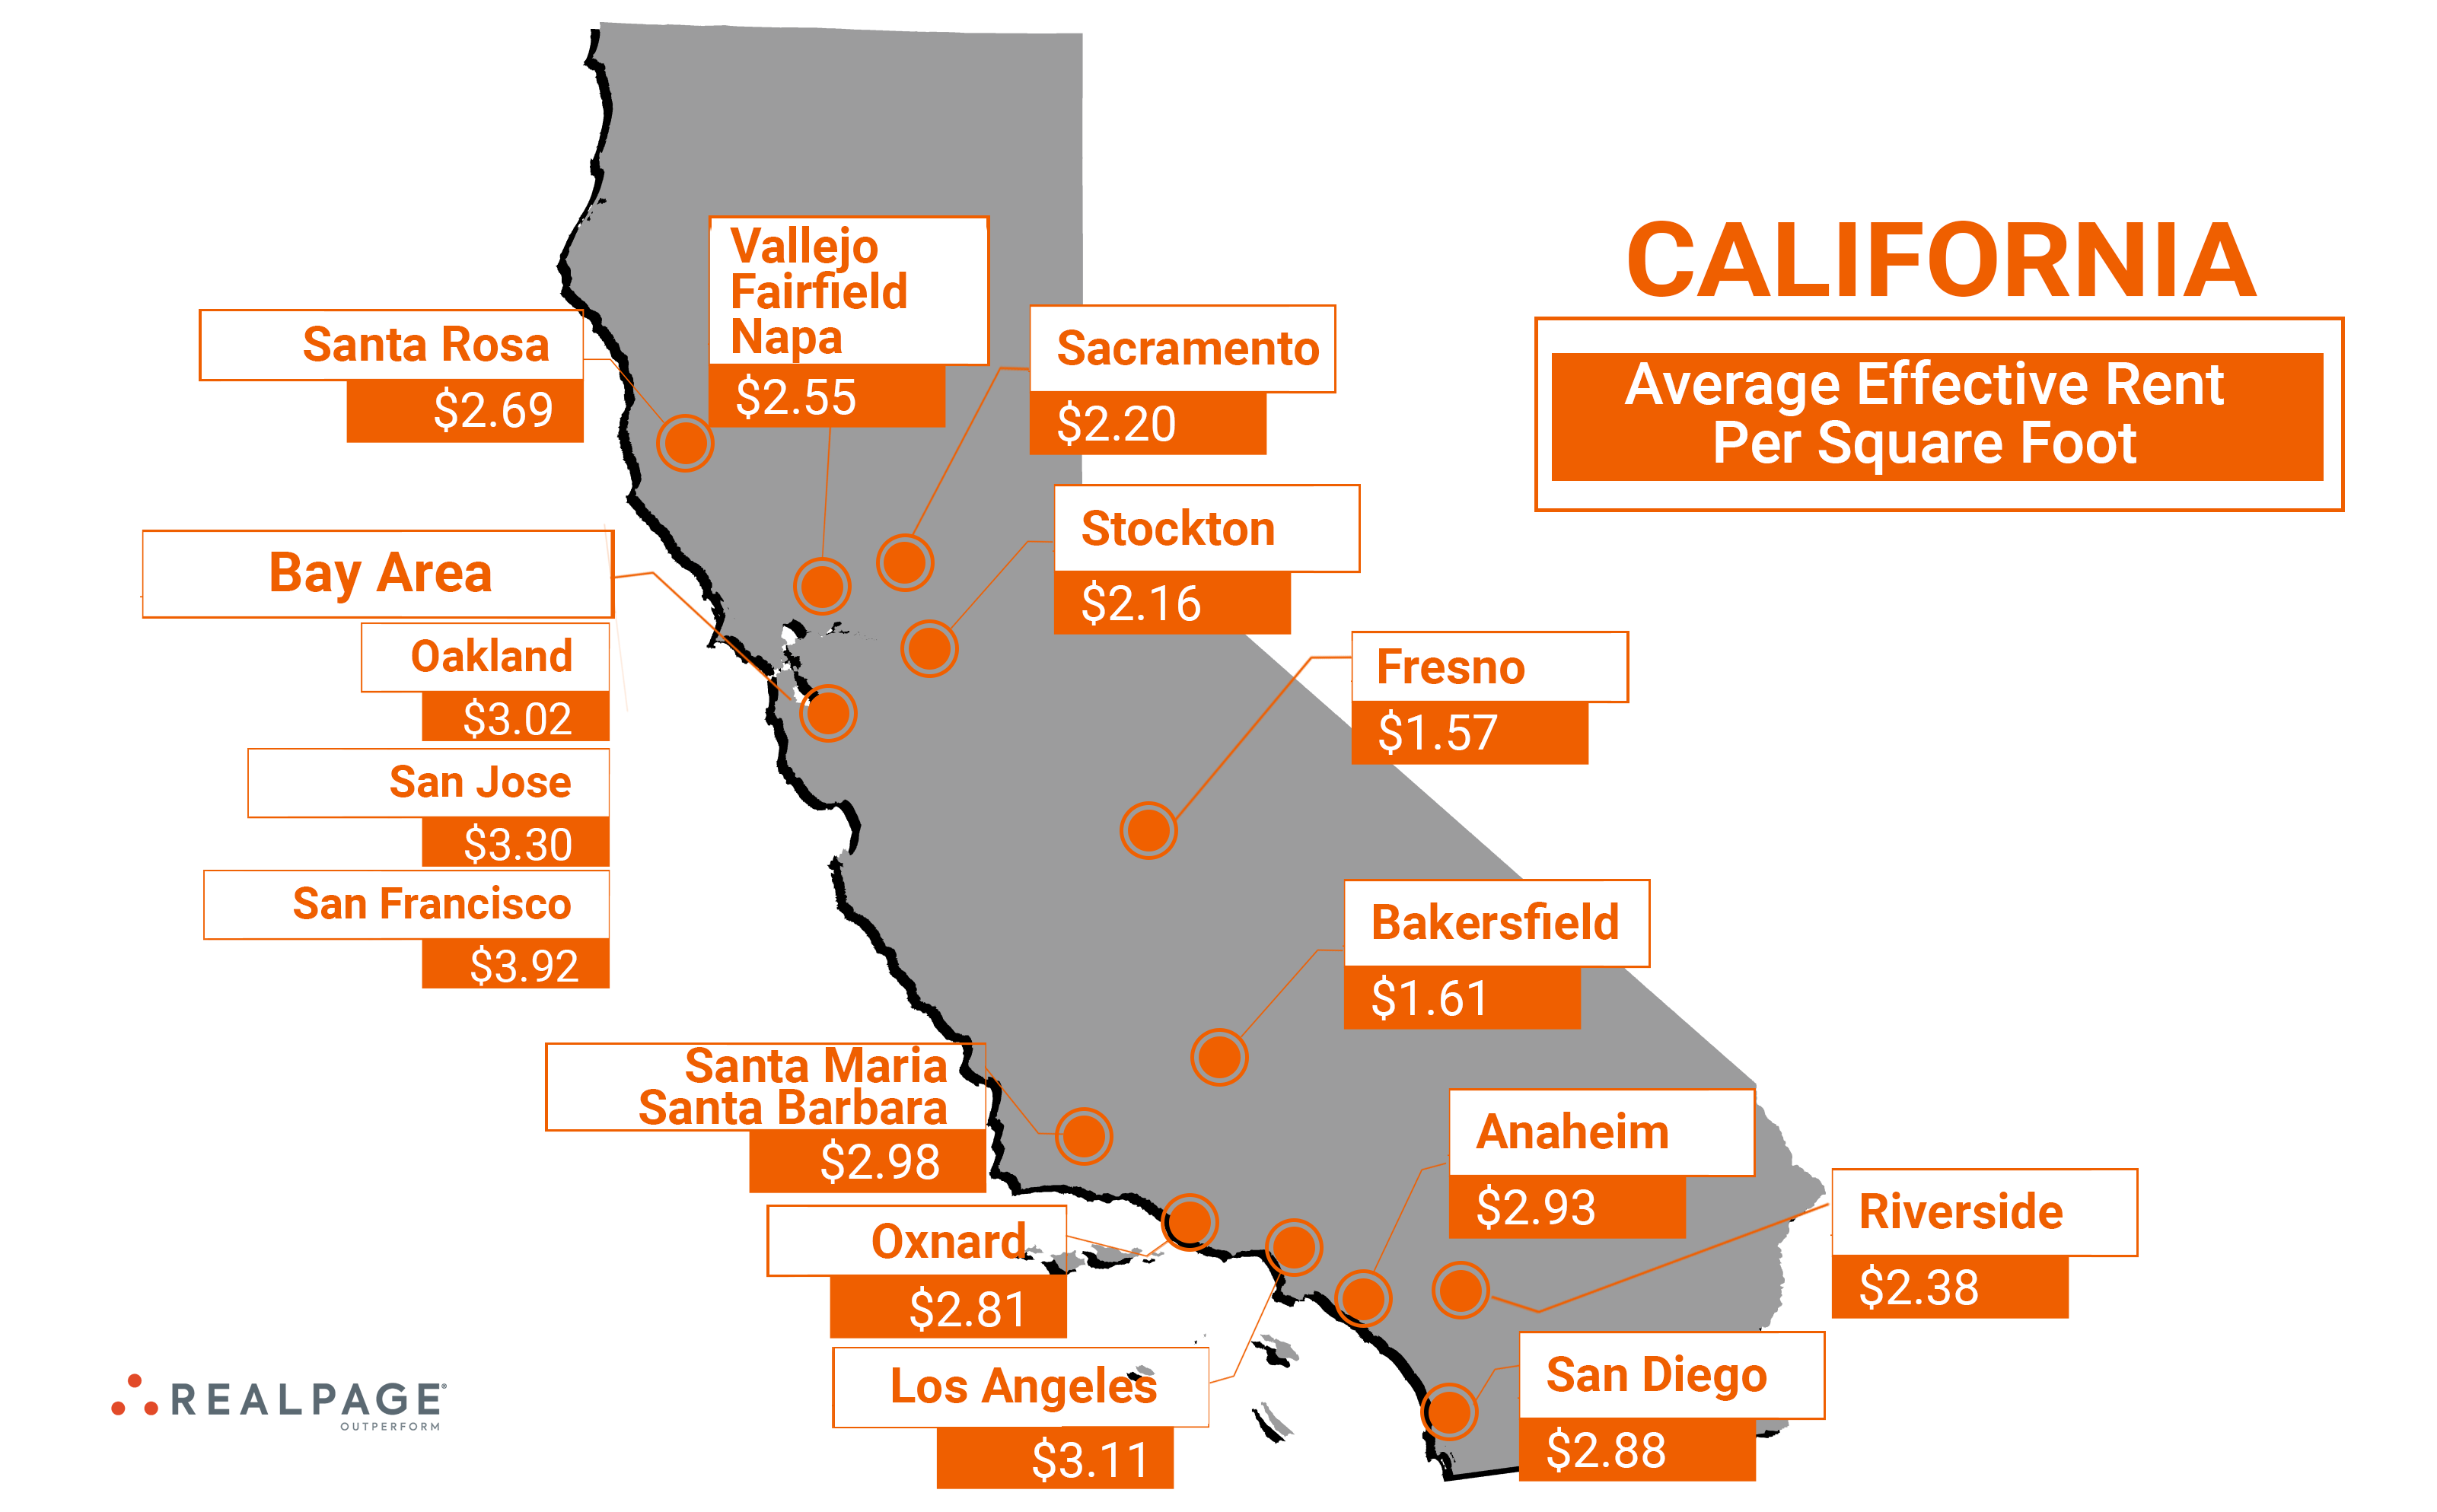 California Apartment Markets Ranked by Rent Per Square Foot